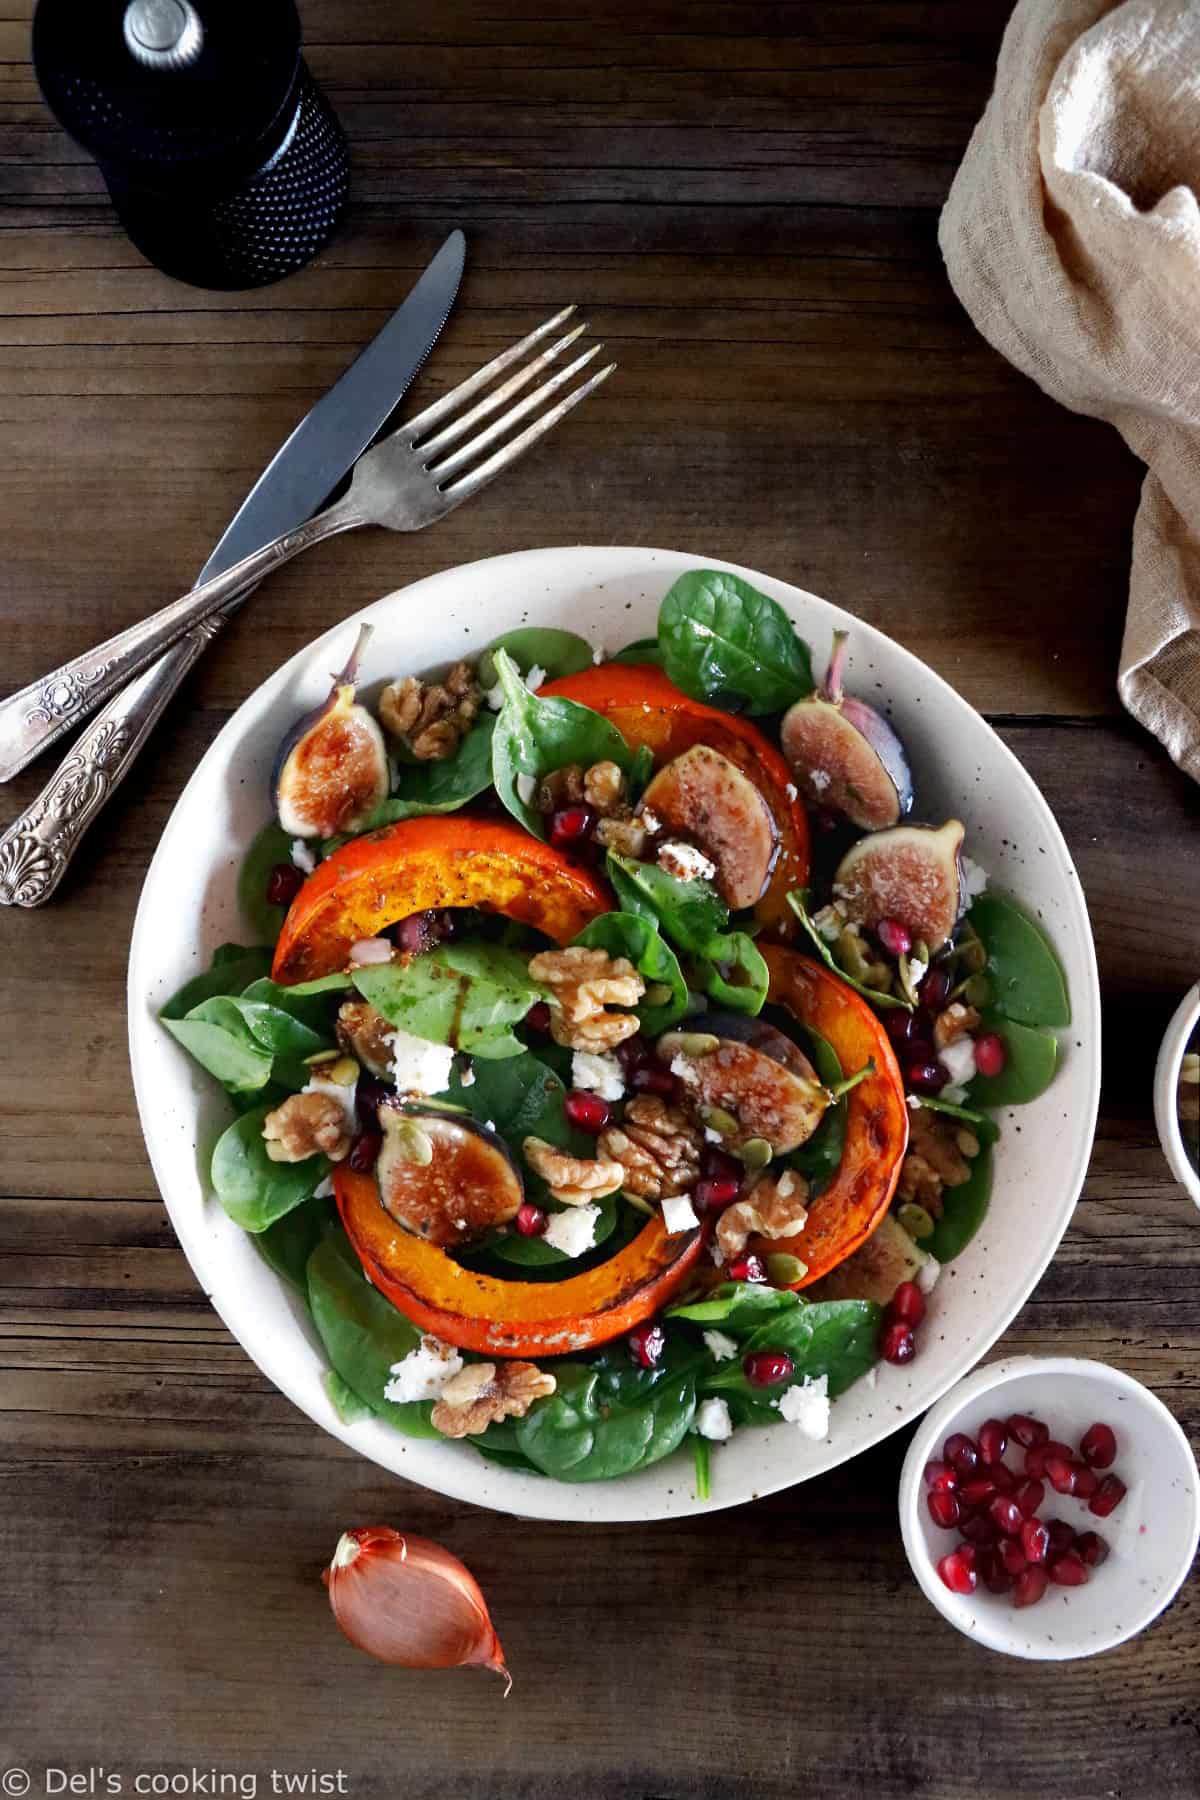 This roasted squash salad features caramelized figs with balsamic vinegar, baby spinach, and a subtle shallot vinaigrette.